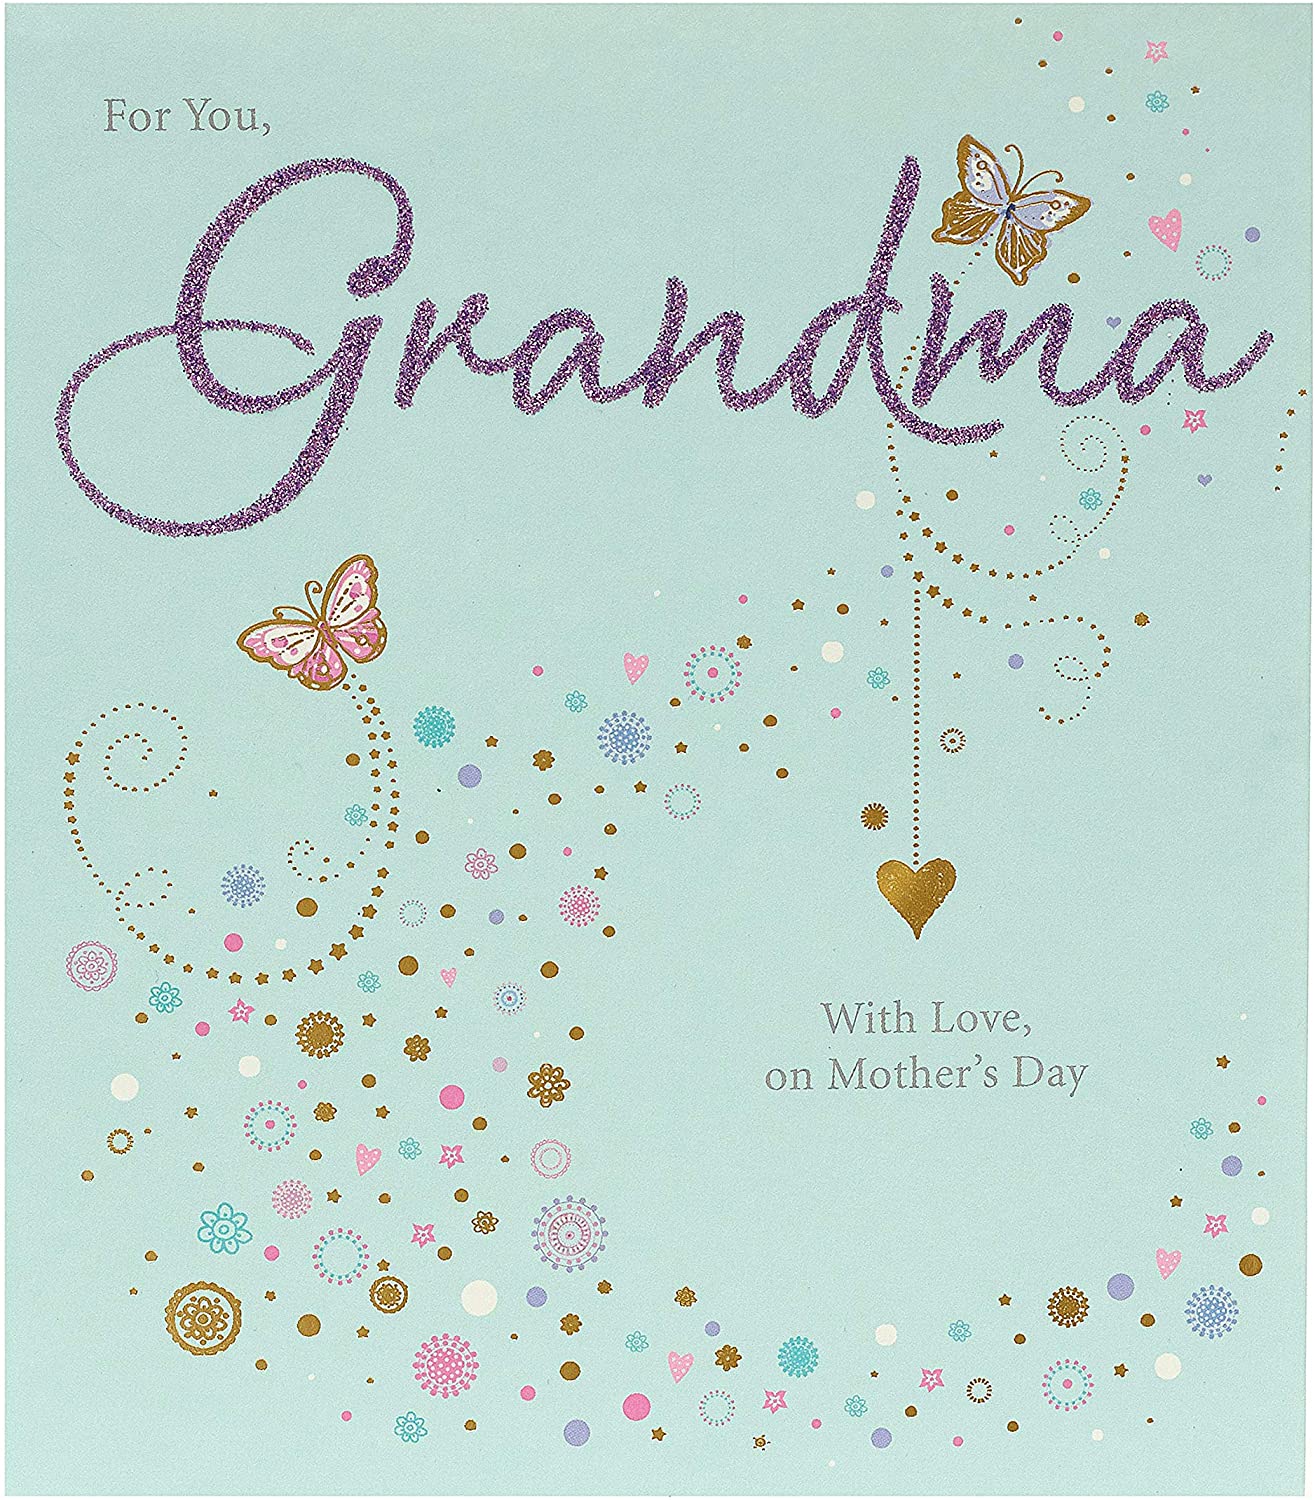 For Grandma Lovely Floral Design Mother's Day Card From Grandchild